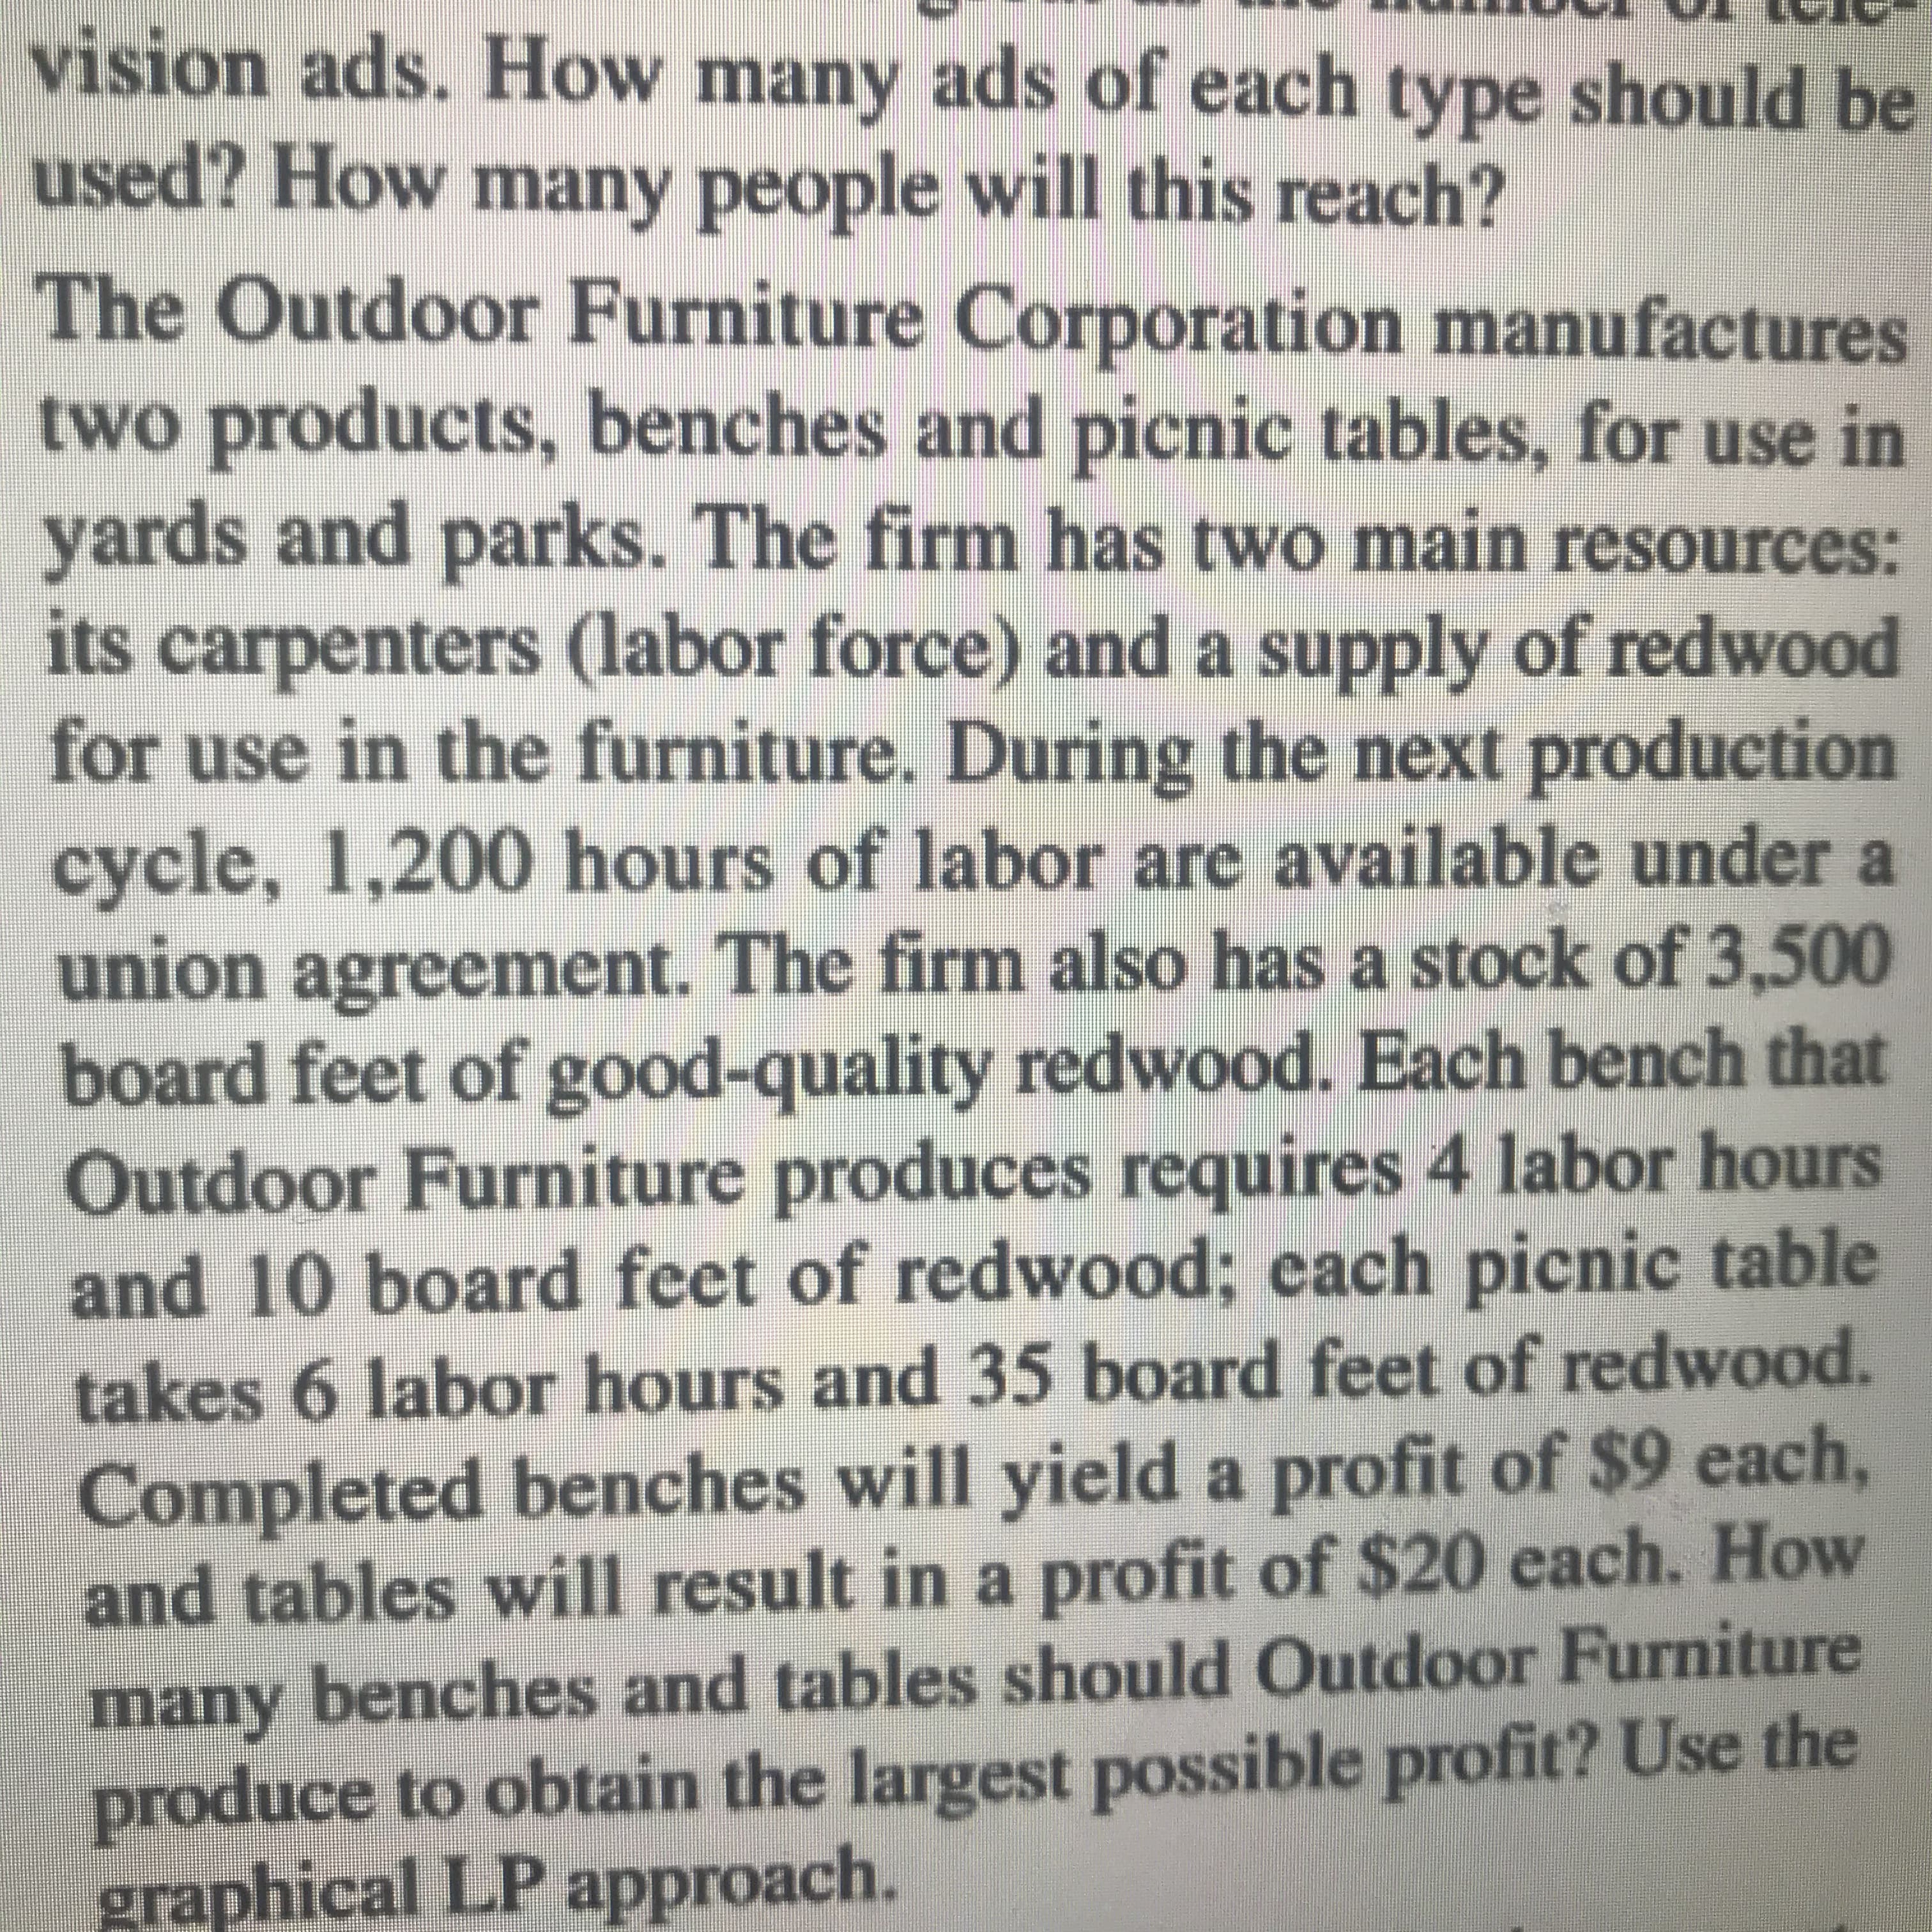 vision ads. How many ads of each type should be
used? How many people will this reach?
The Outdoor Furniture Corporation manufactures
two products, benches and picnic tables, for use in
yards and parks. The firm has two main resources:
its carpenters (labor force) and a supply of redwood
for use in the furniture. During the next production
cycle, 1,200 hours of labor are available under a
union
agreement. The firm also has a stock of 3,500
board feet of good-quality redwood. Each bench that
Outdoor Furniture produces requires 4 labor hours
and 10 board feet of redwood; each picnic table
takes 6 labor hours and 35 board feet of redwood.
Completed benches will yield a profit of $9 each,
and tables will result in a profit of $20 each. How
many benches and tables should Outdoor Furniture
produce to obtain the largest possible profit? Use the
graphical LP approach.
